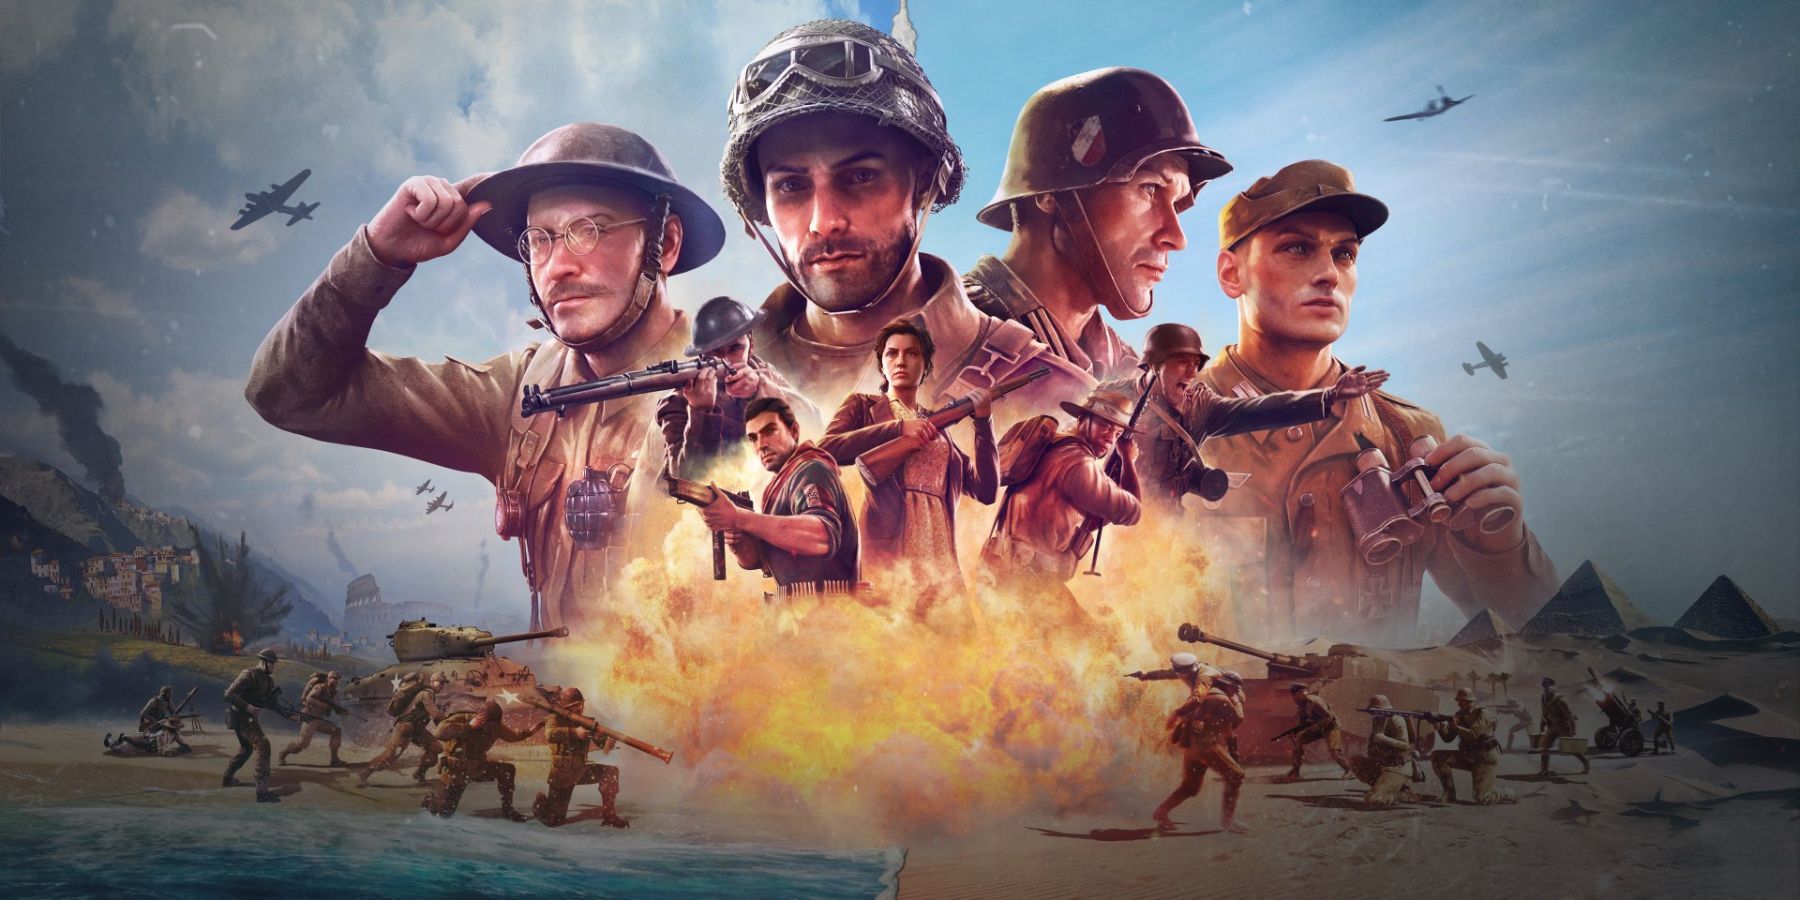 Key art for Company of Heroes 3, showing a group of Allied and Axis soldiers alongside Italian resistance fighters, highlighting the game's two single player campaigns.